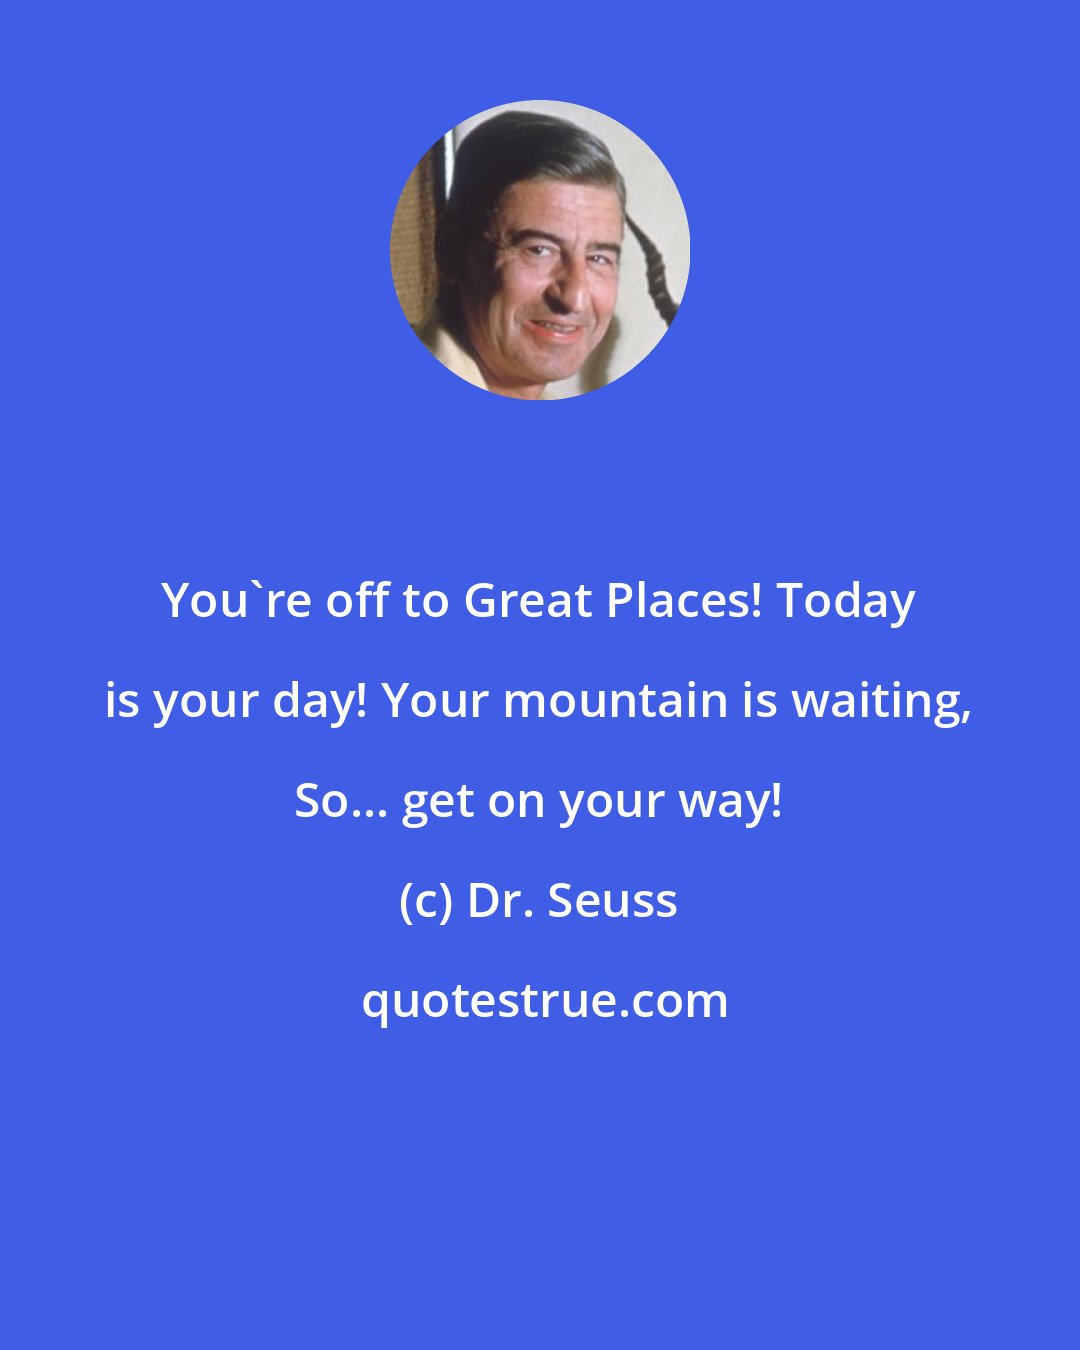 Dr. Seuss: You're off to Great Places! Today is your day! Your mountain is waiting, So... get on your way!